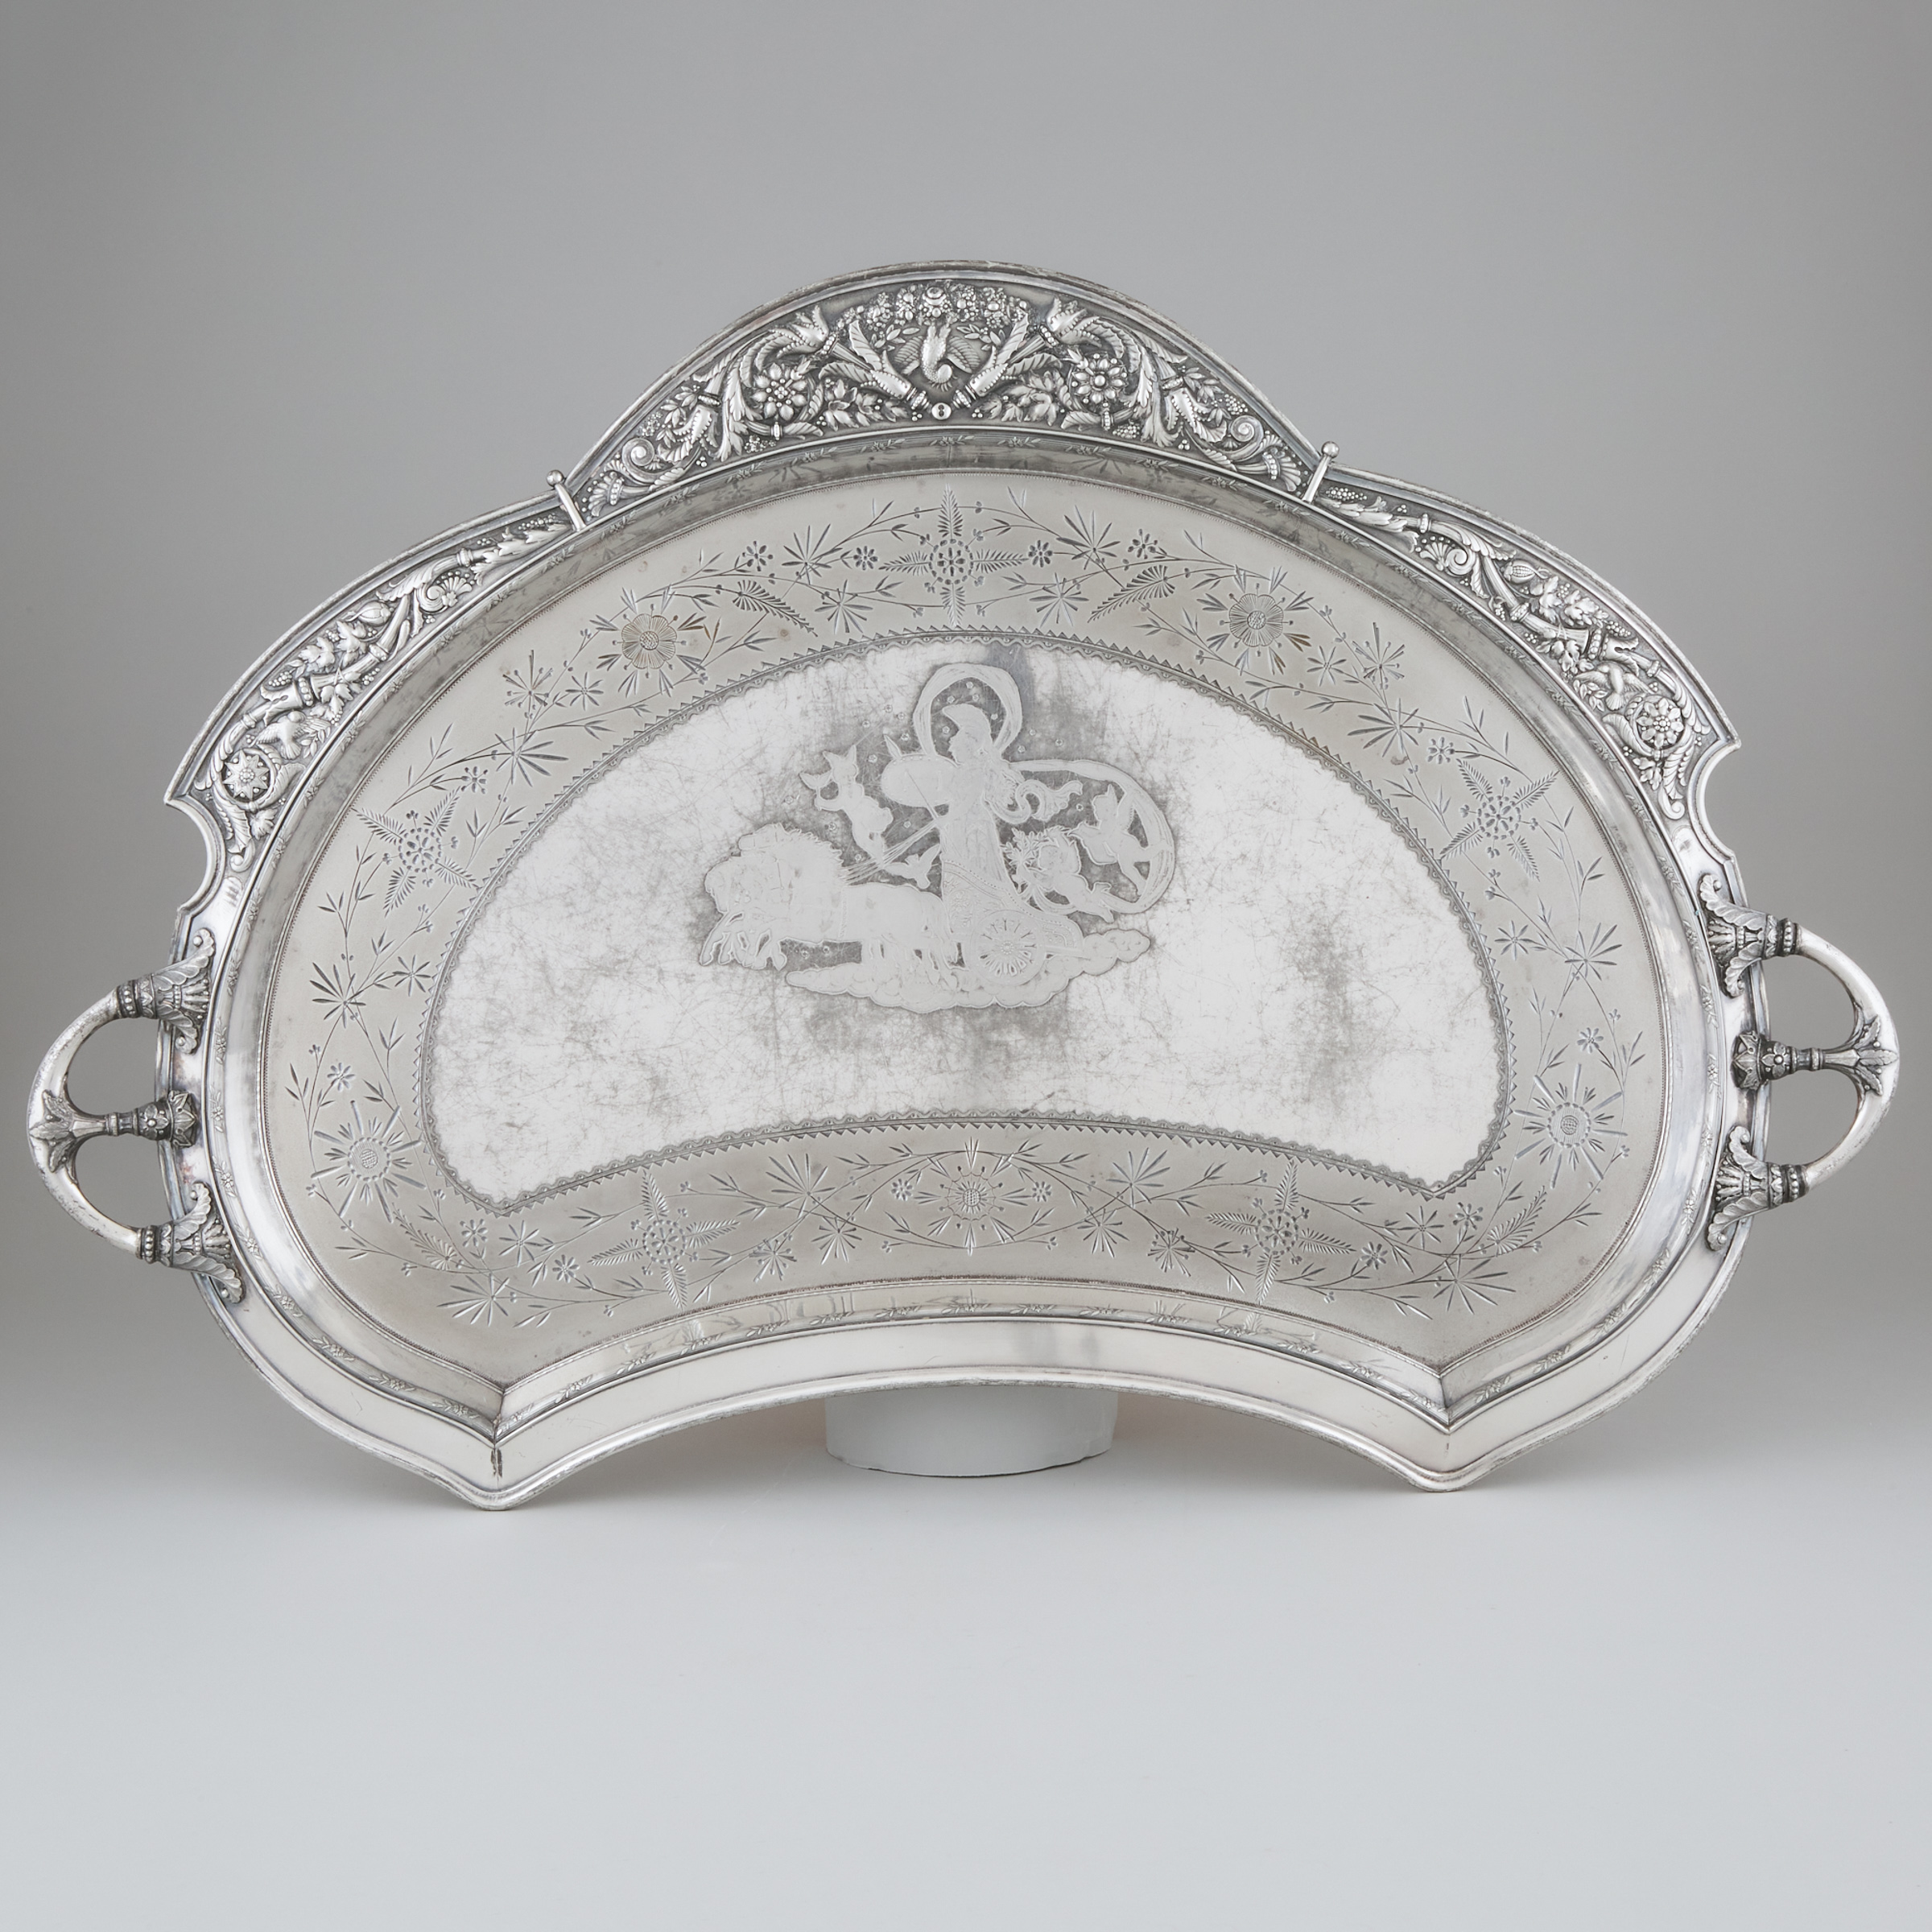 American Silver Plated Butler's Serving Tray, Rogers, Smith & Co., c.1870